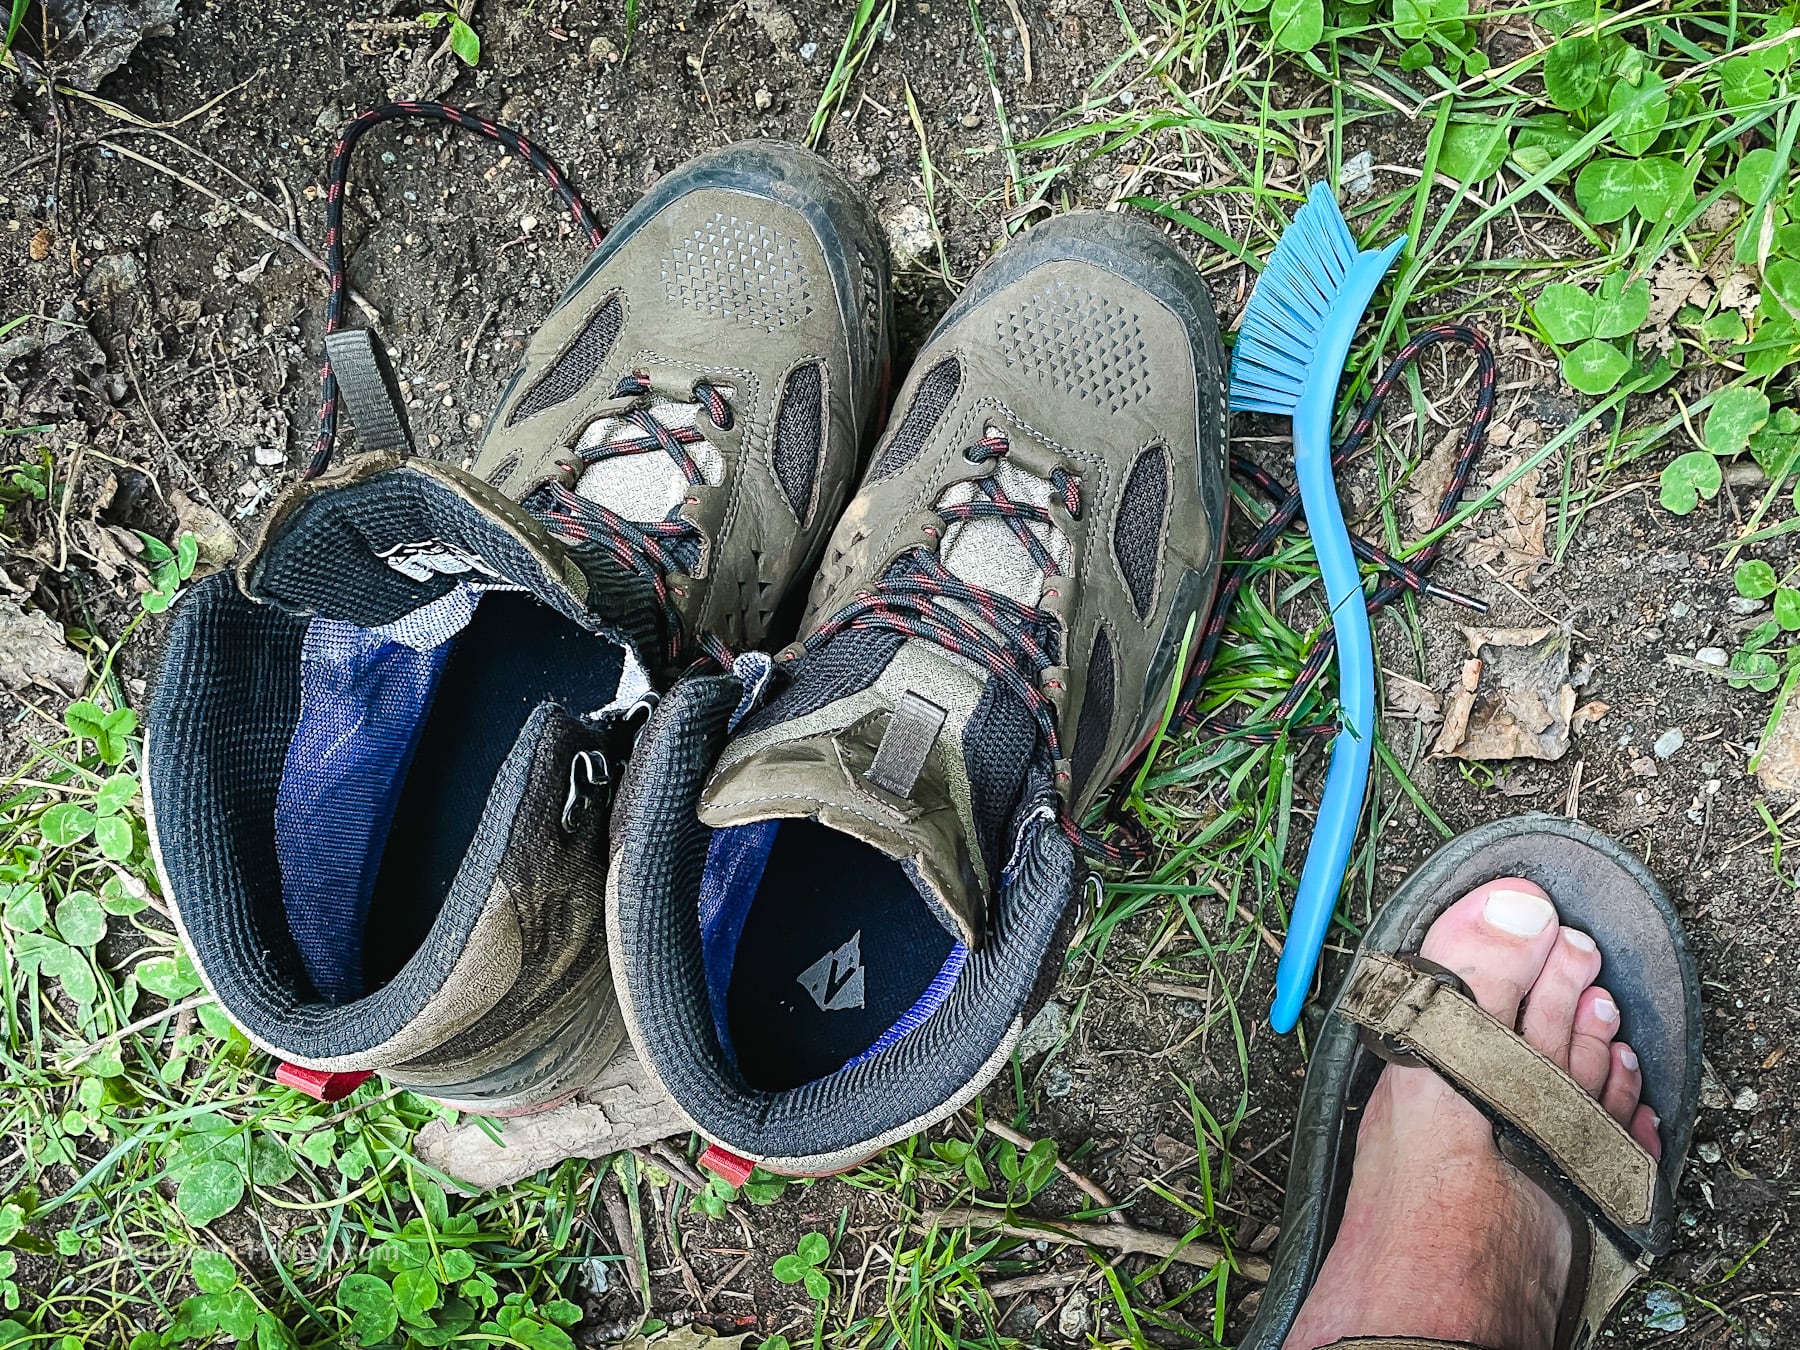 hiking boots cleaned up after a hike